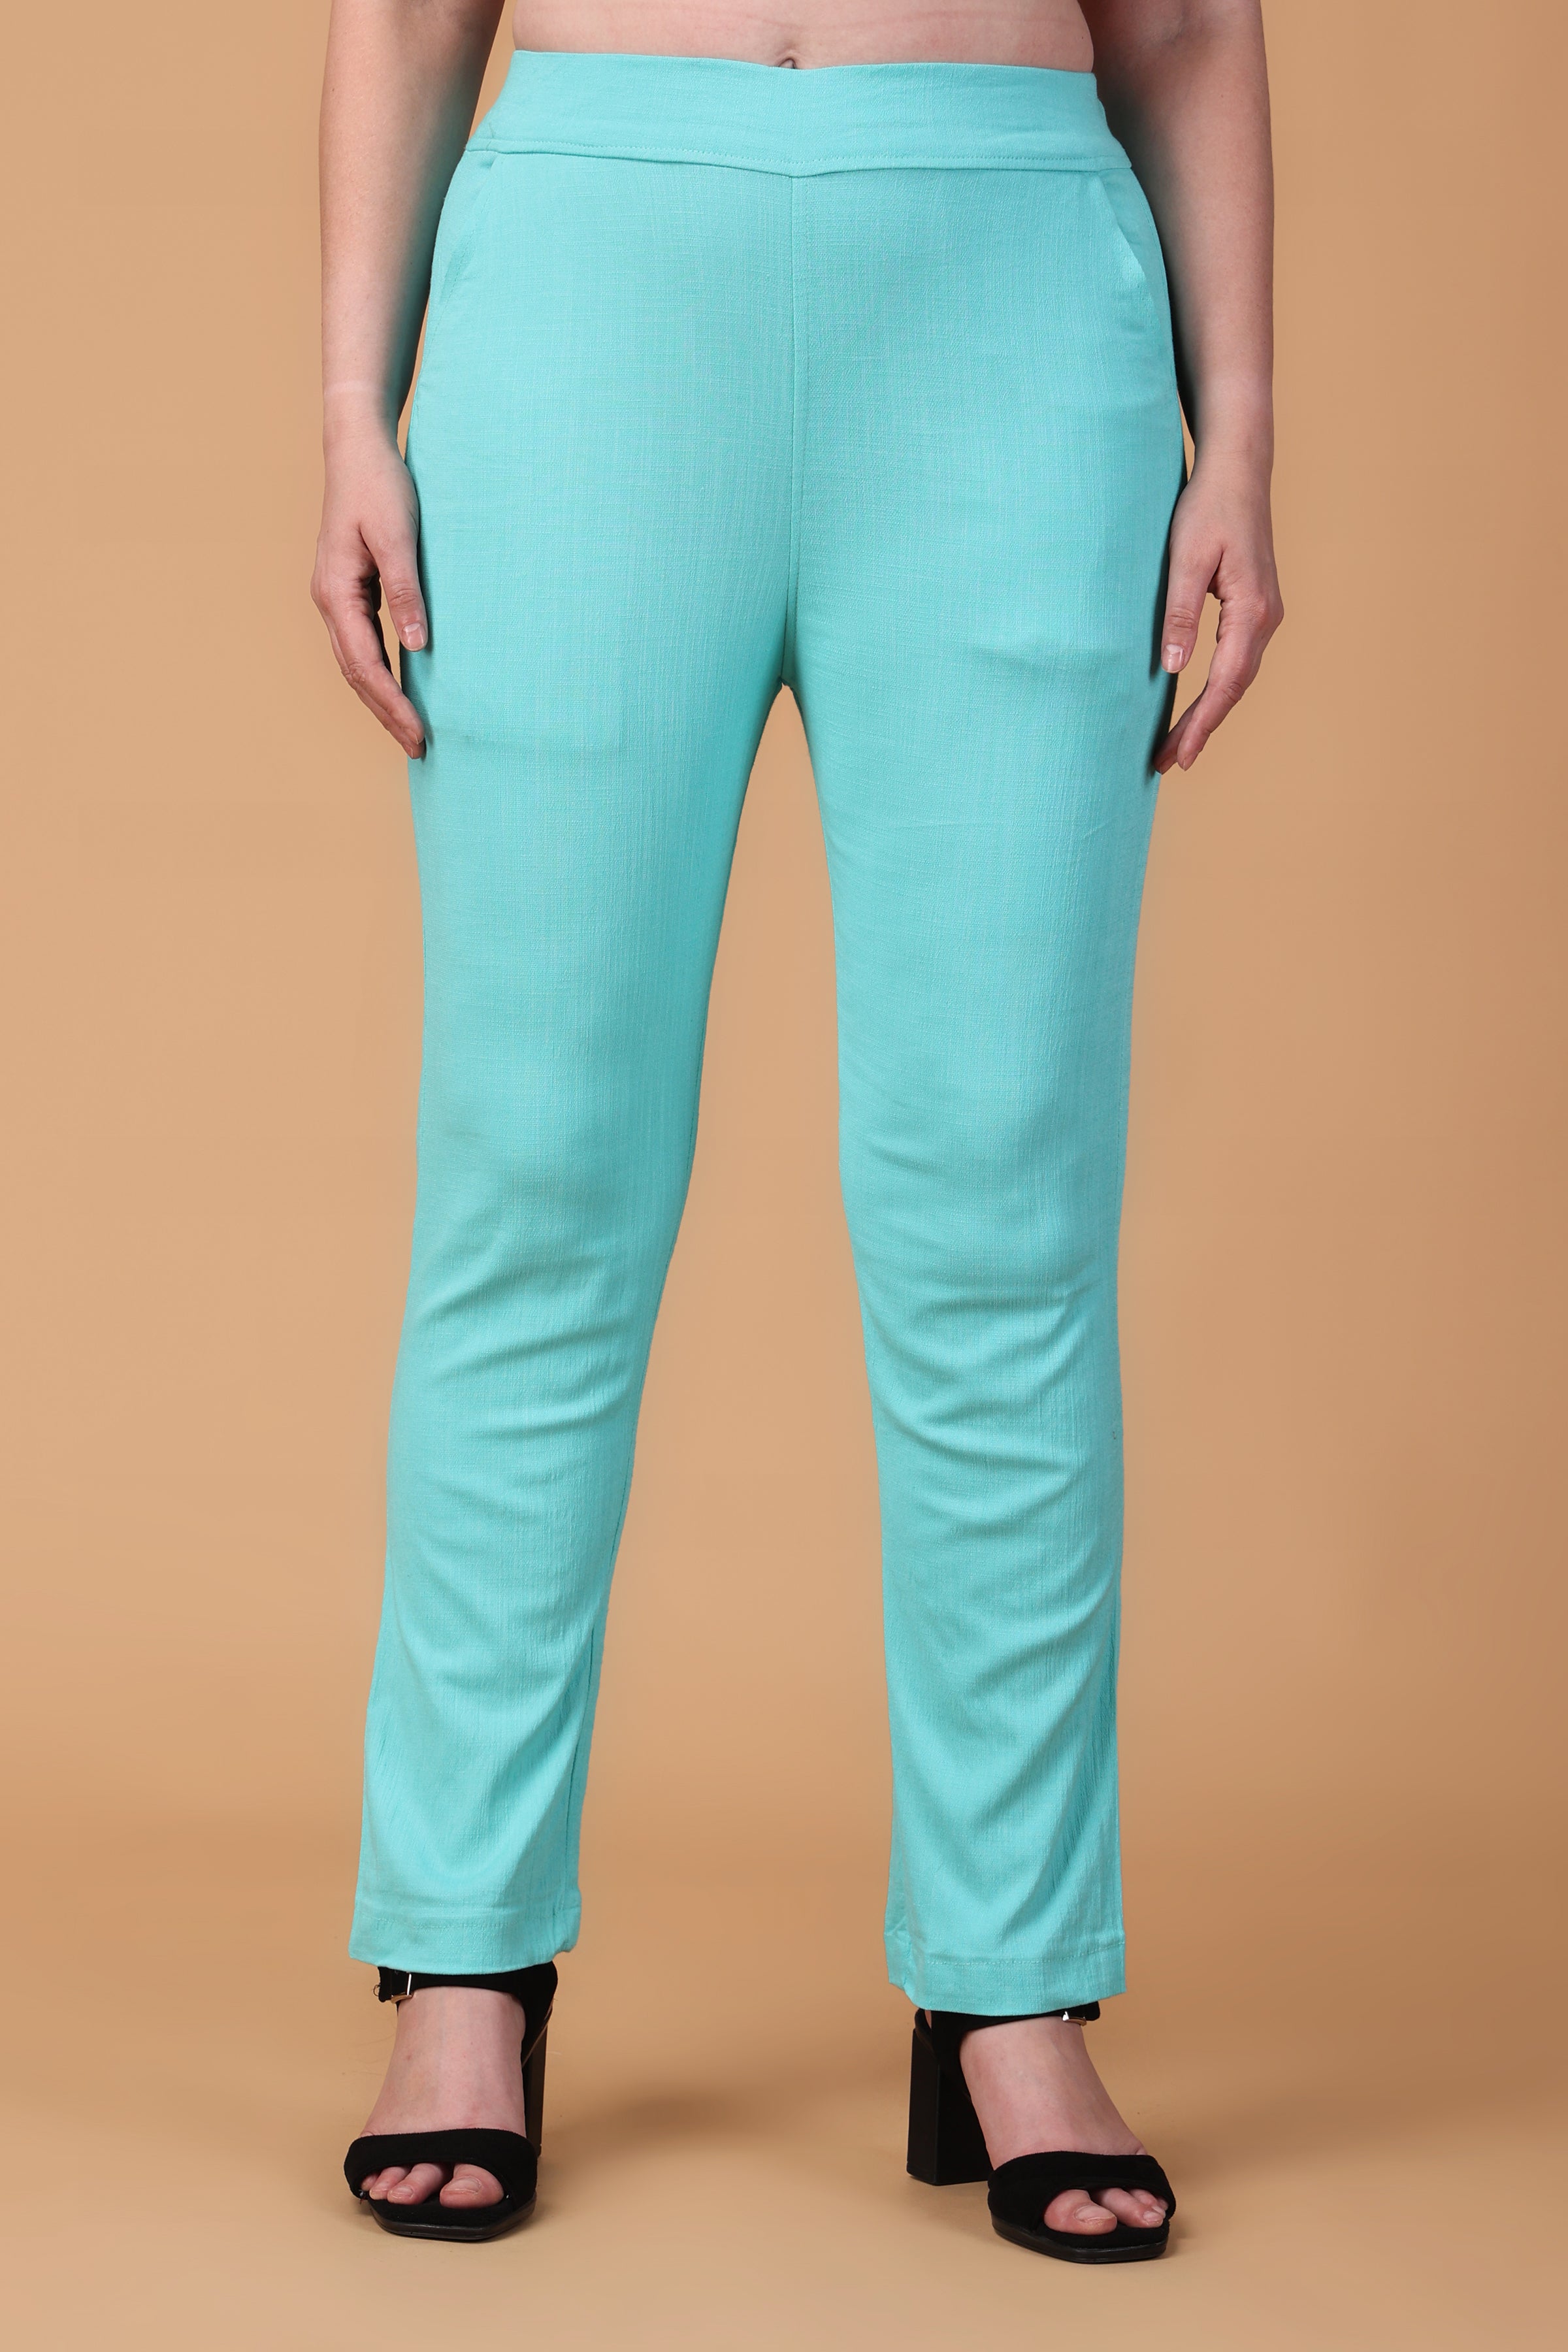 Lycra Fabric Pants for Mens